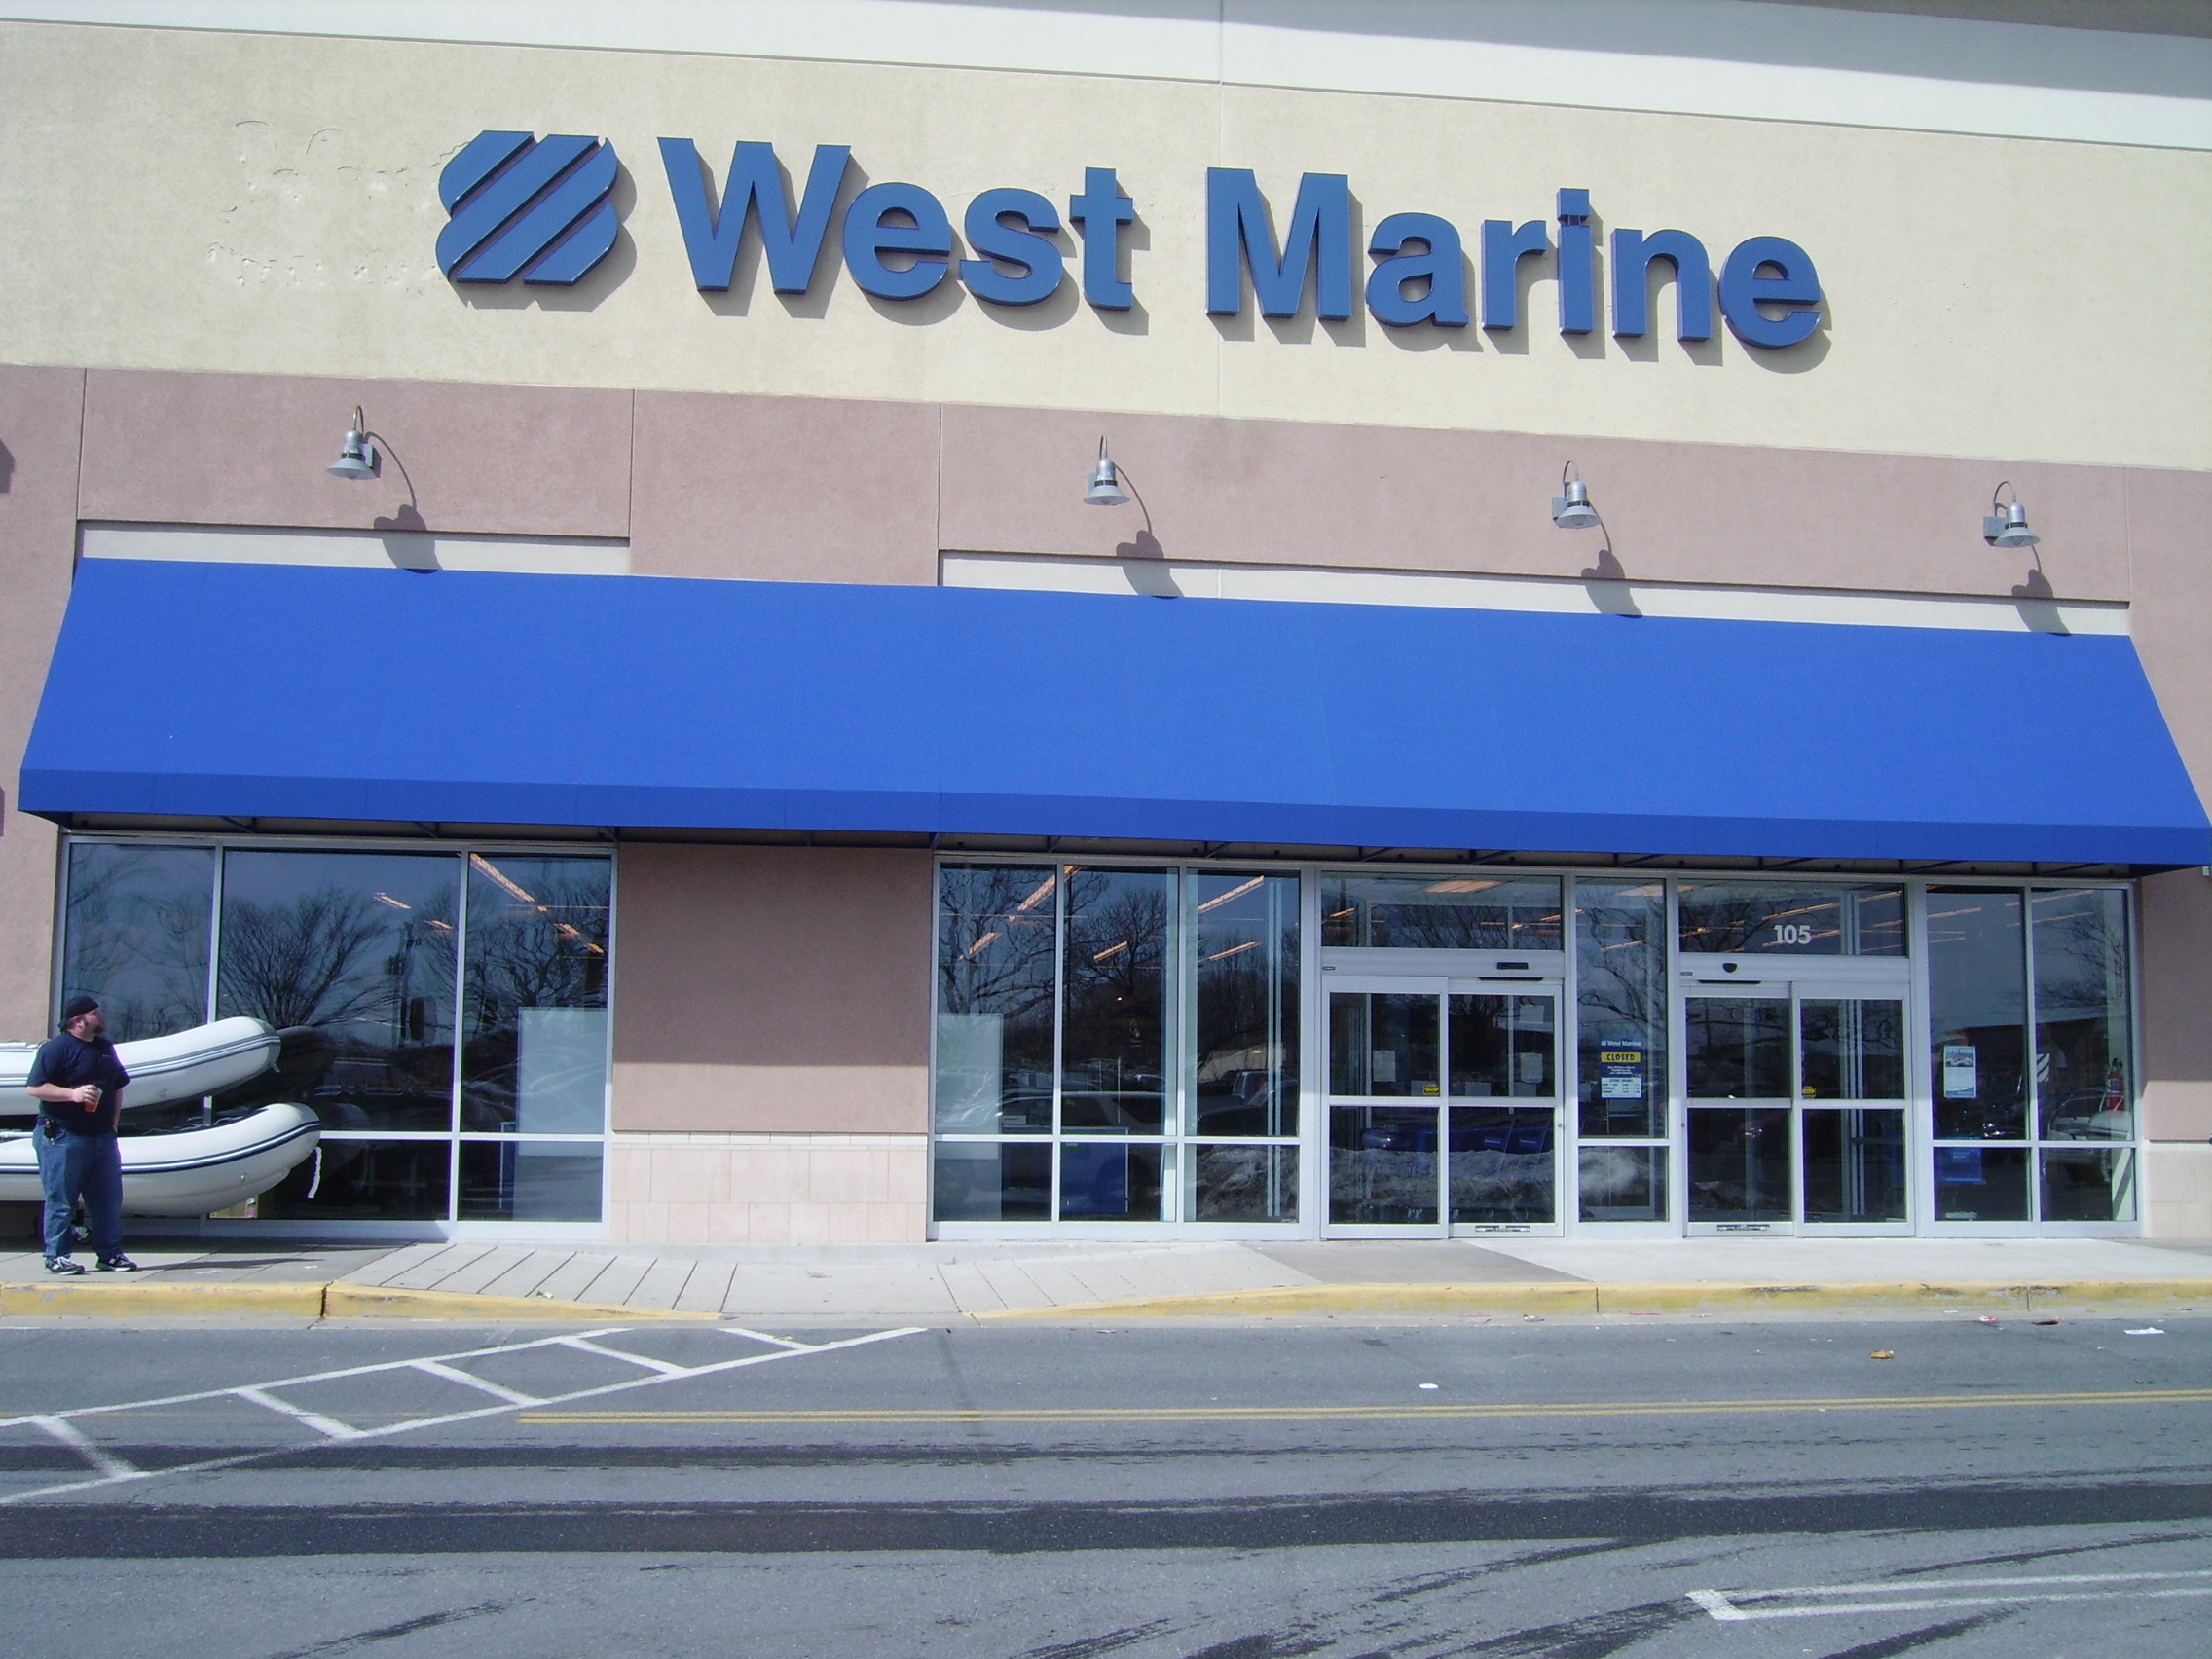 Boat Supplies, Fishing Gear & More - Baltimore, MD 21237